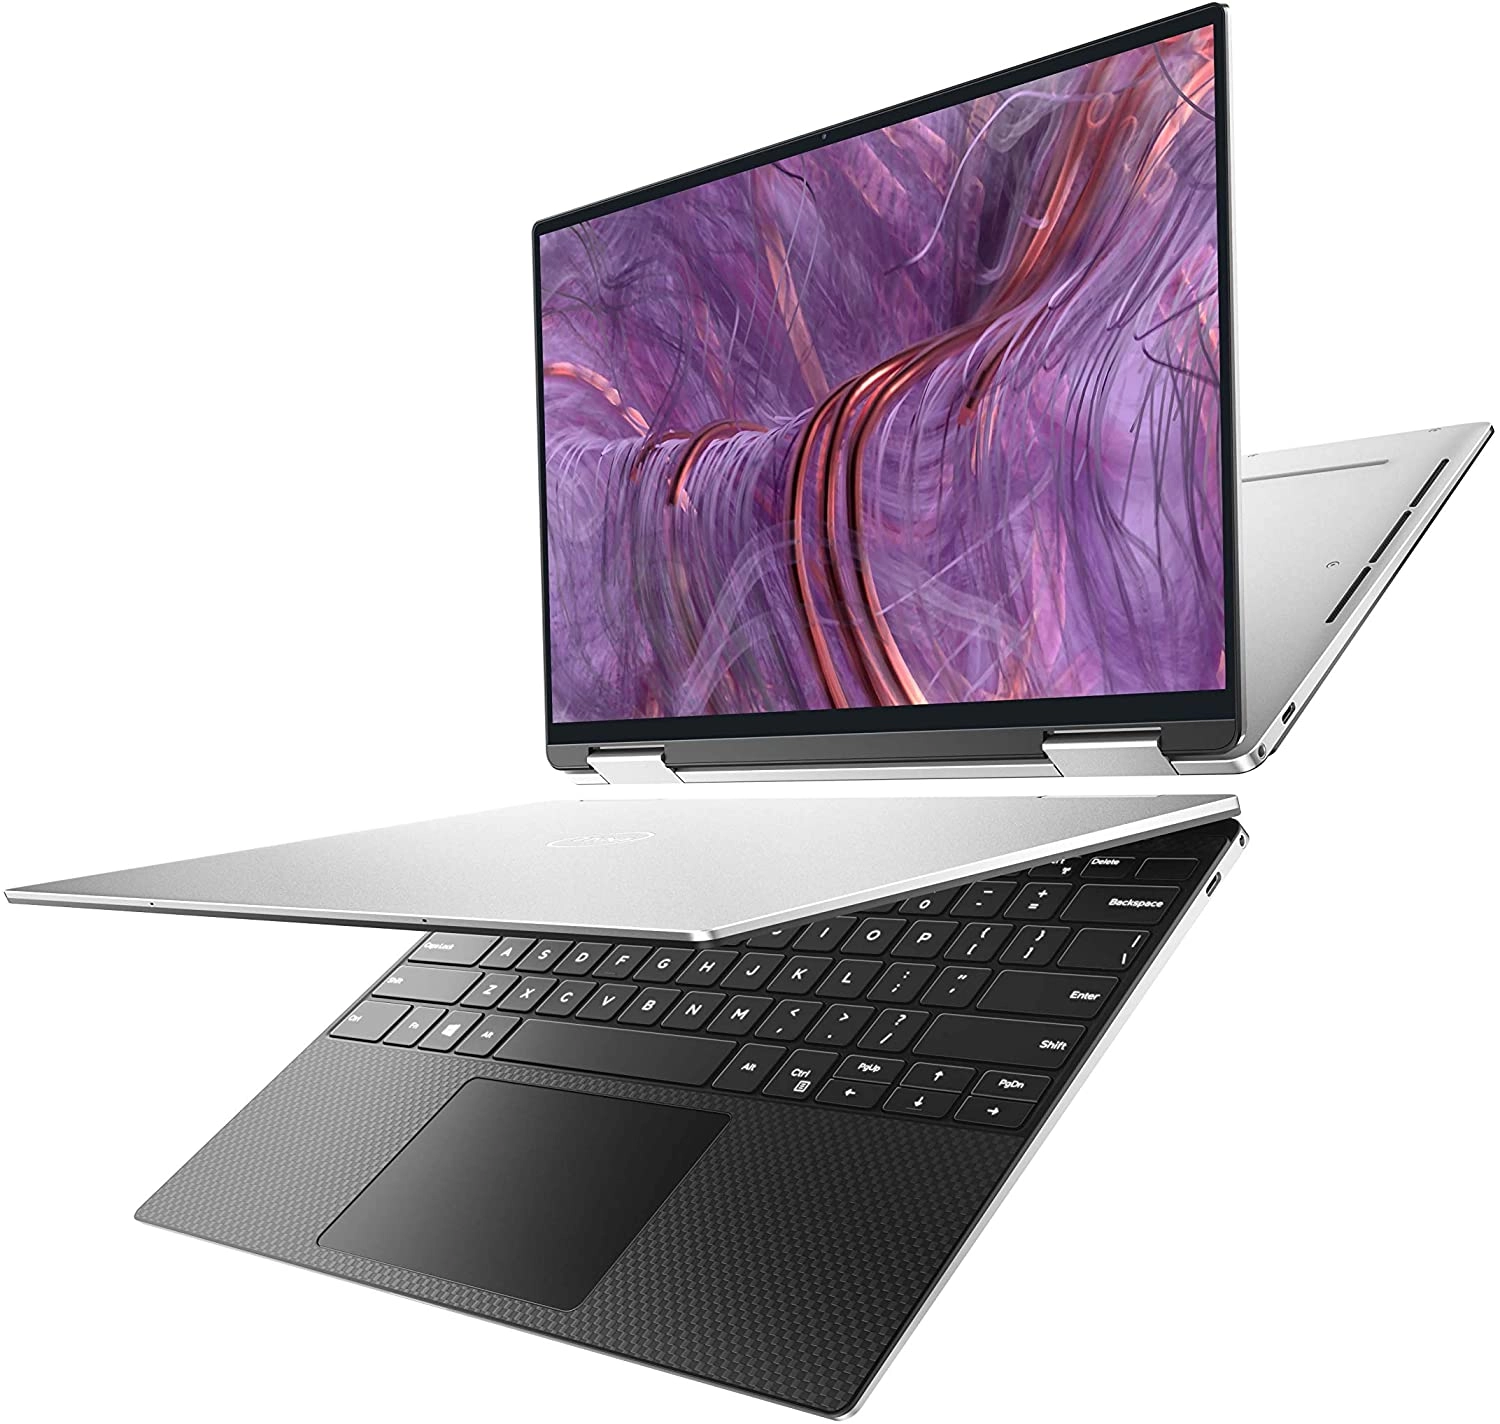 Dell XPS 13 2in1 laptop image